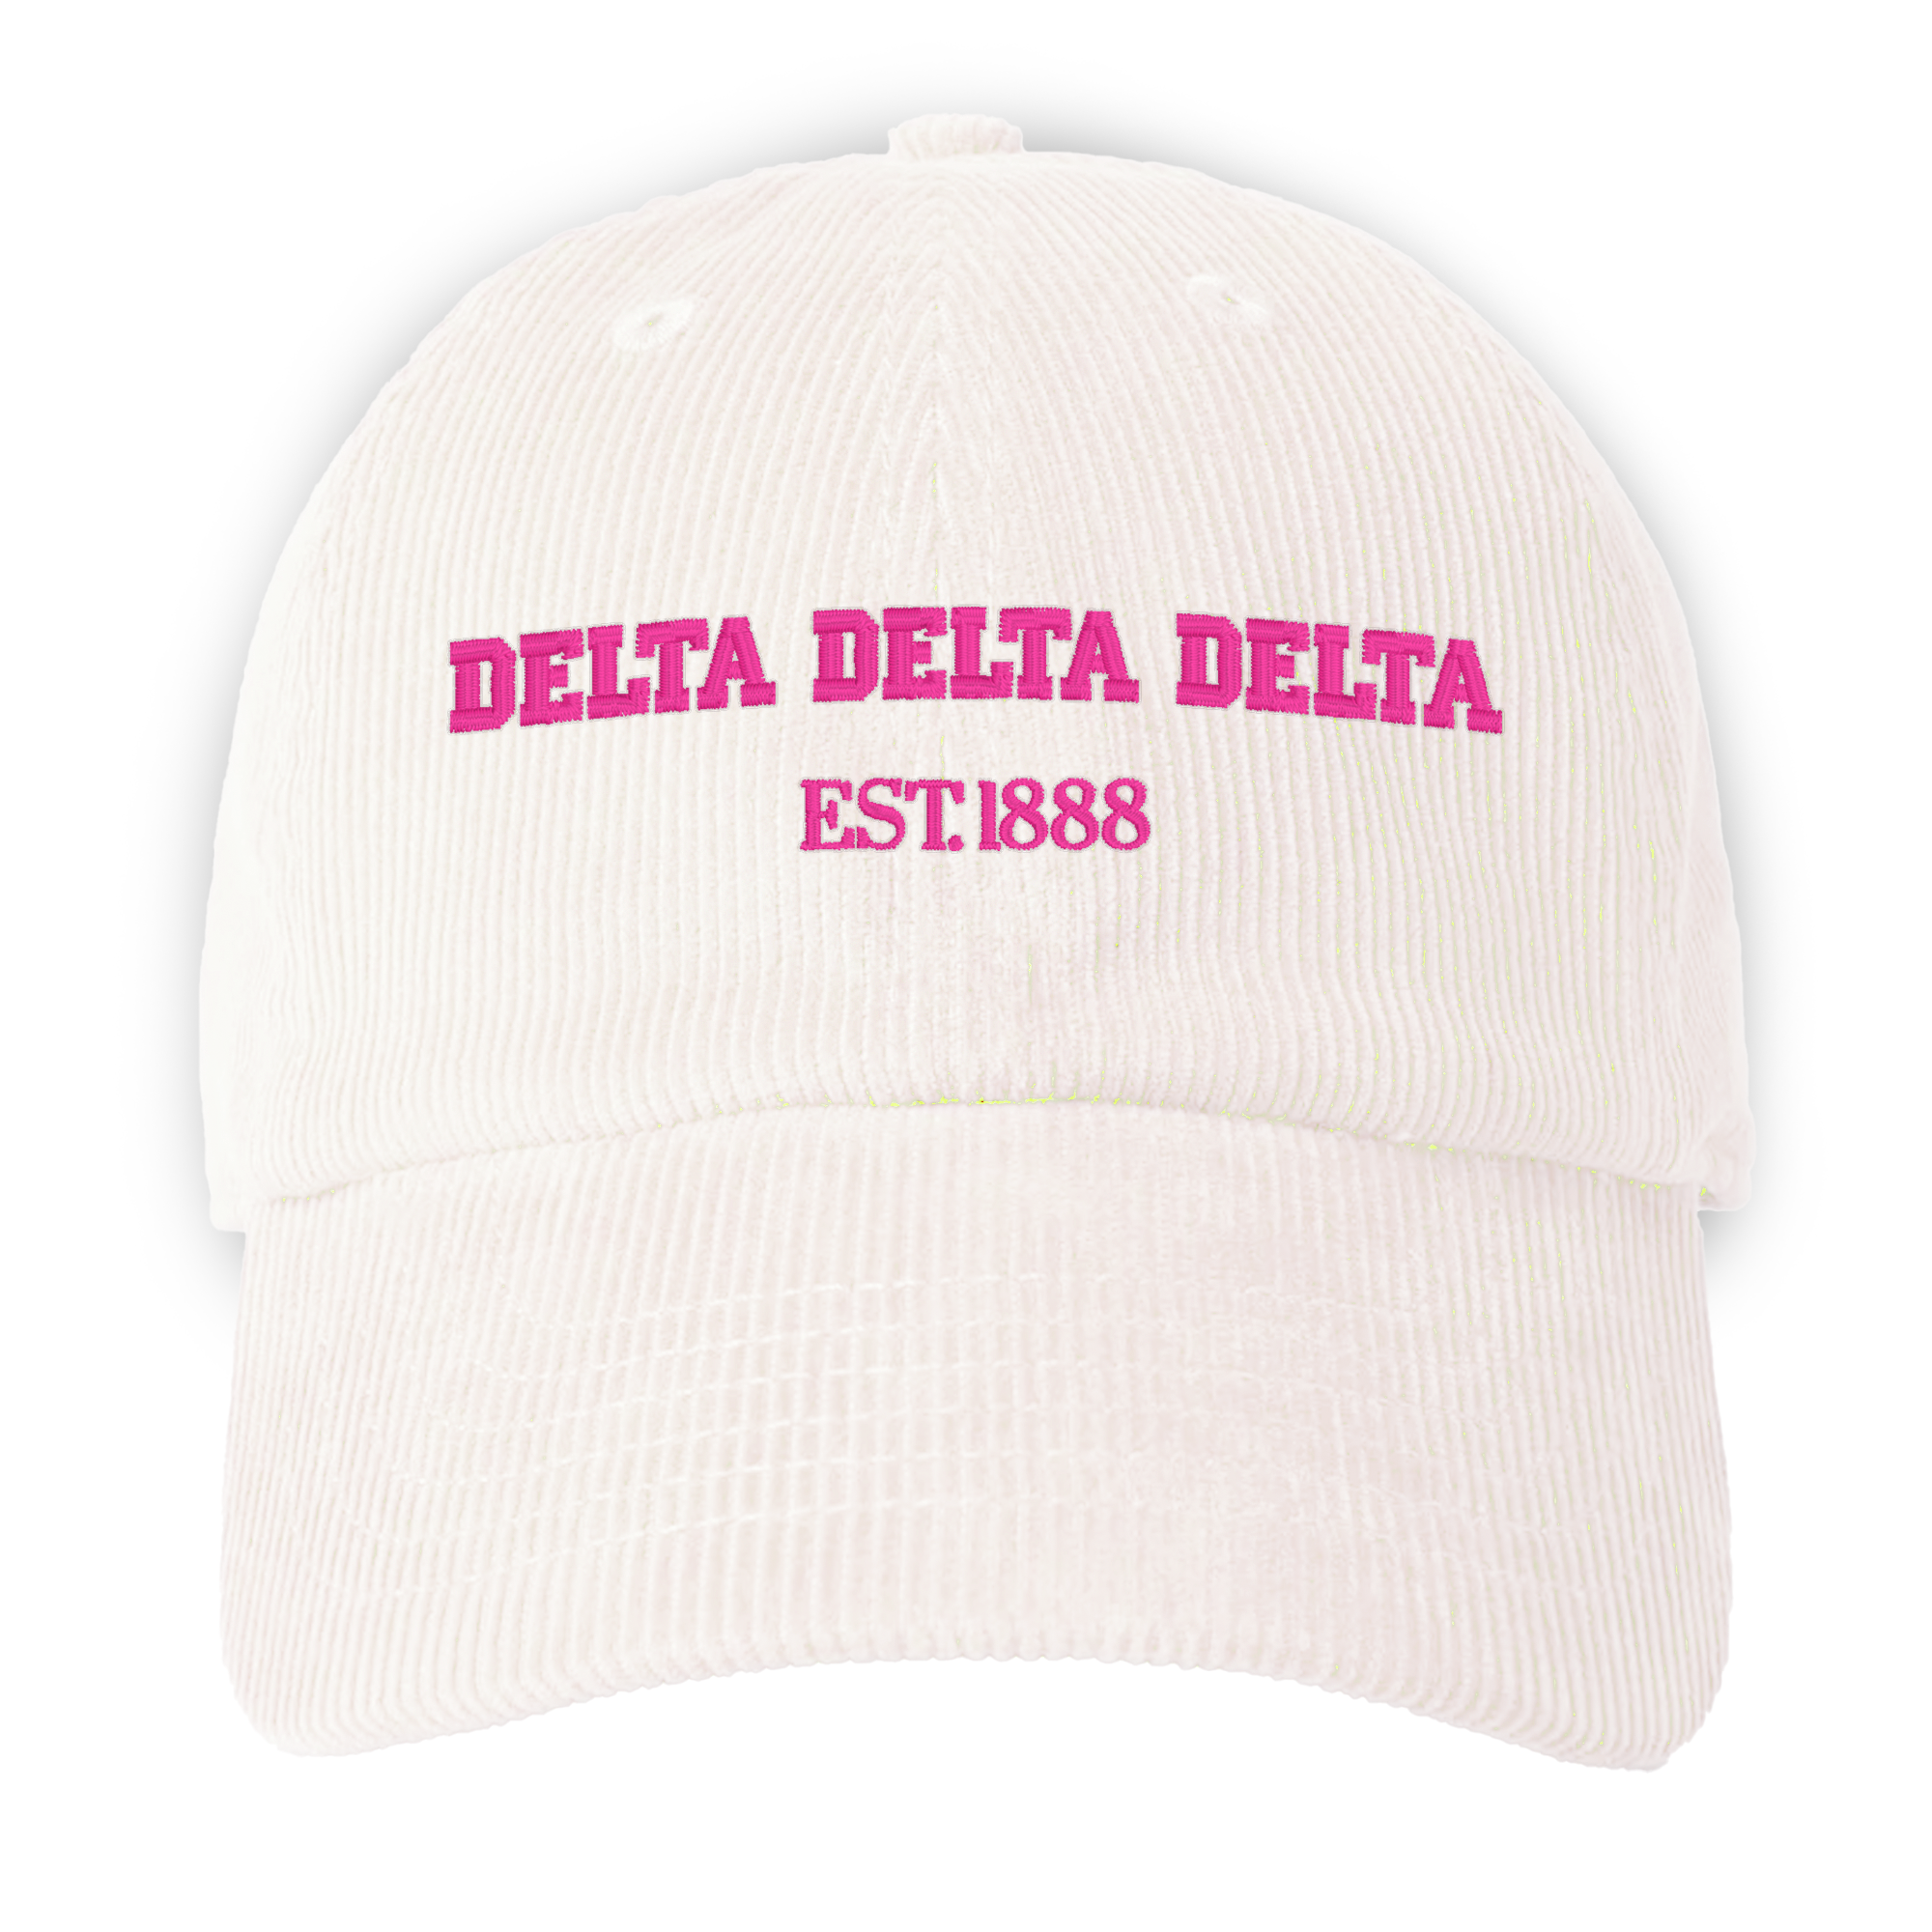 a white hat with a pink delta delta embroidered on it